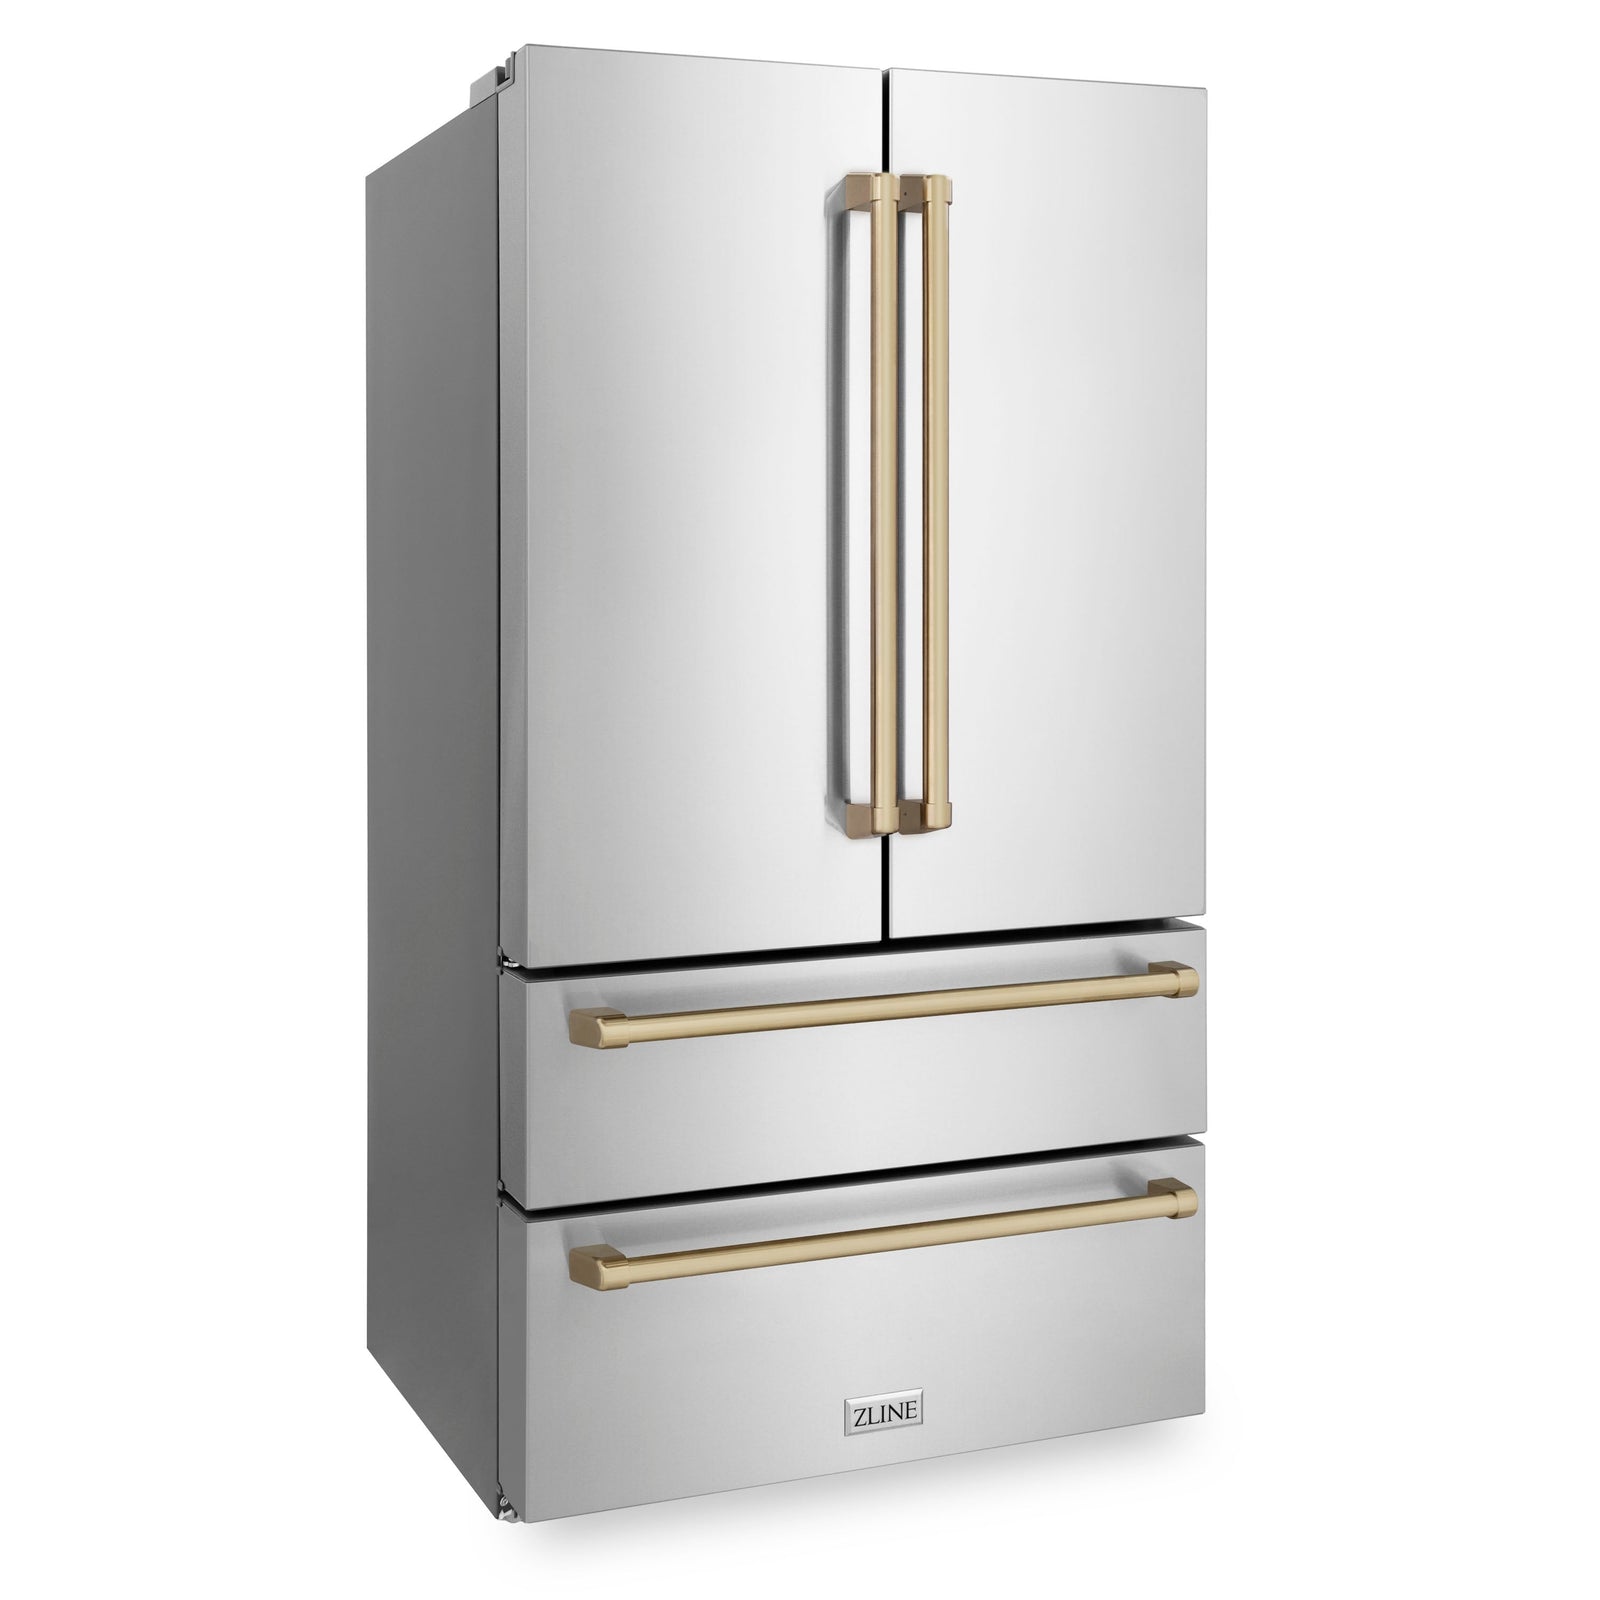 ZLINE 36 In. Autograph 22.5 cu. ft. Refrigerator with Ice Maker in Fingerprint Resistant Stainless Steel and Champagne Bronze Accents, RFMZ-36-CB - Smart Kitchen Lab